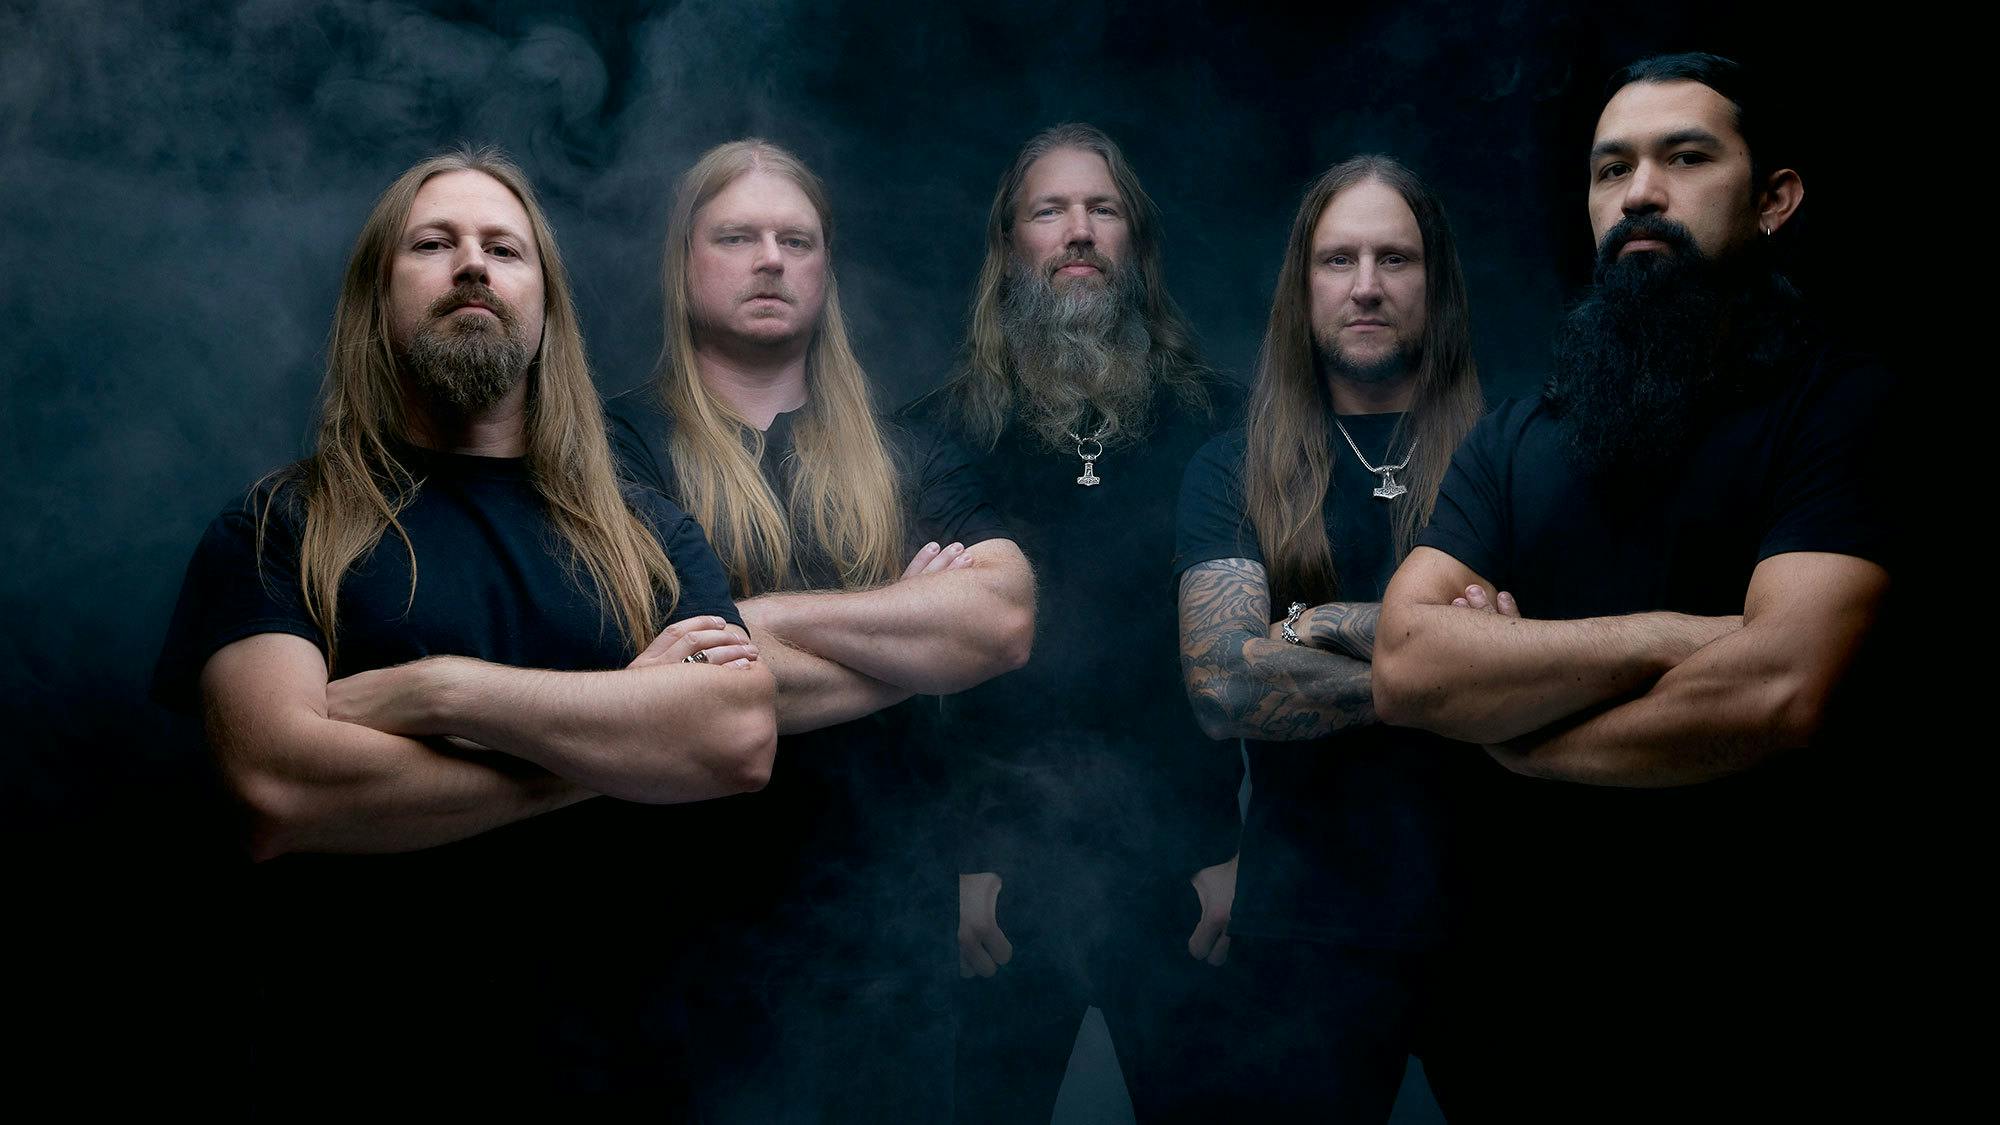 Amon Amarth Announce UK Tour With Arch Enemy – Tickets On Sale Now